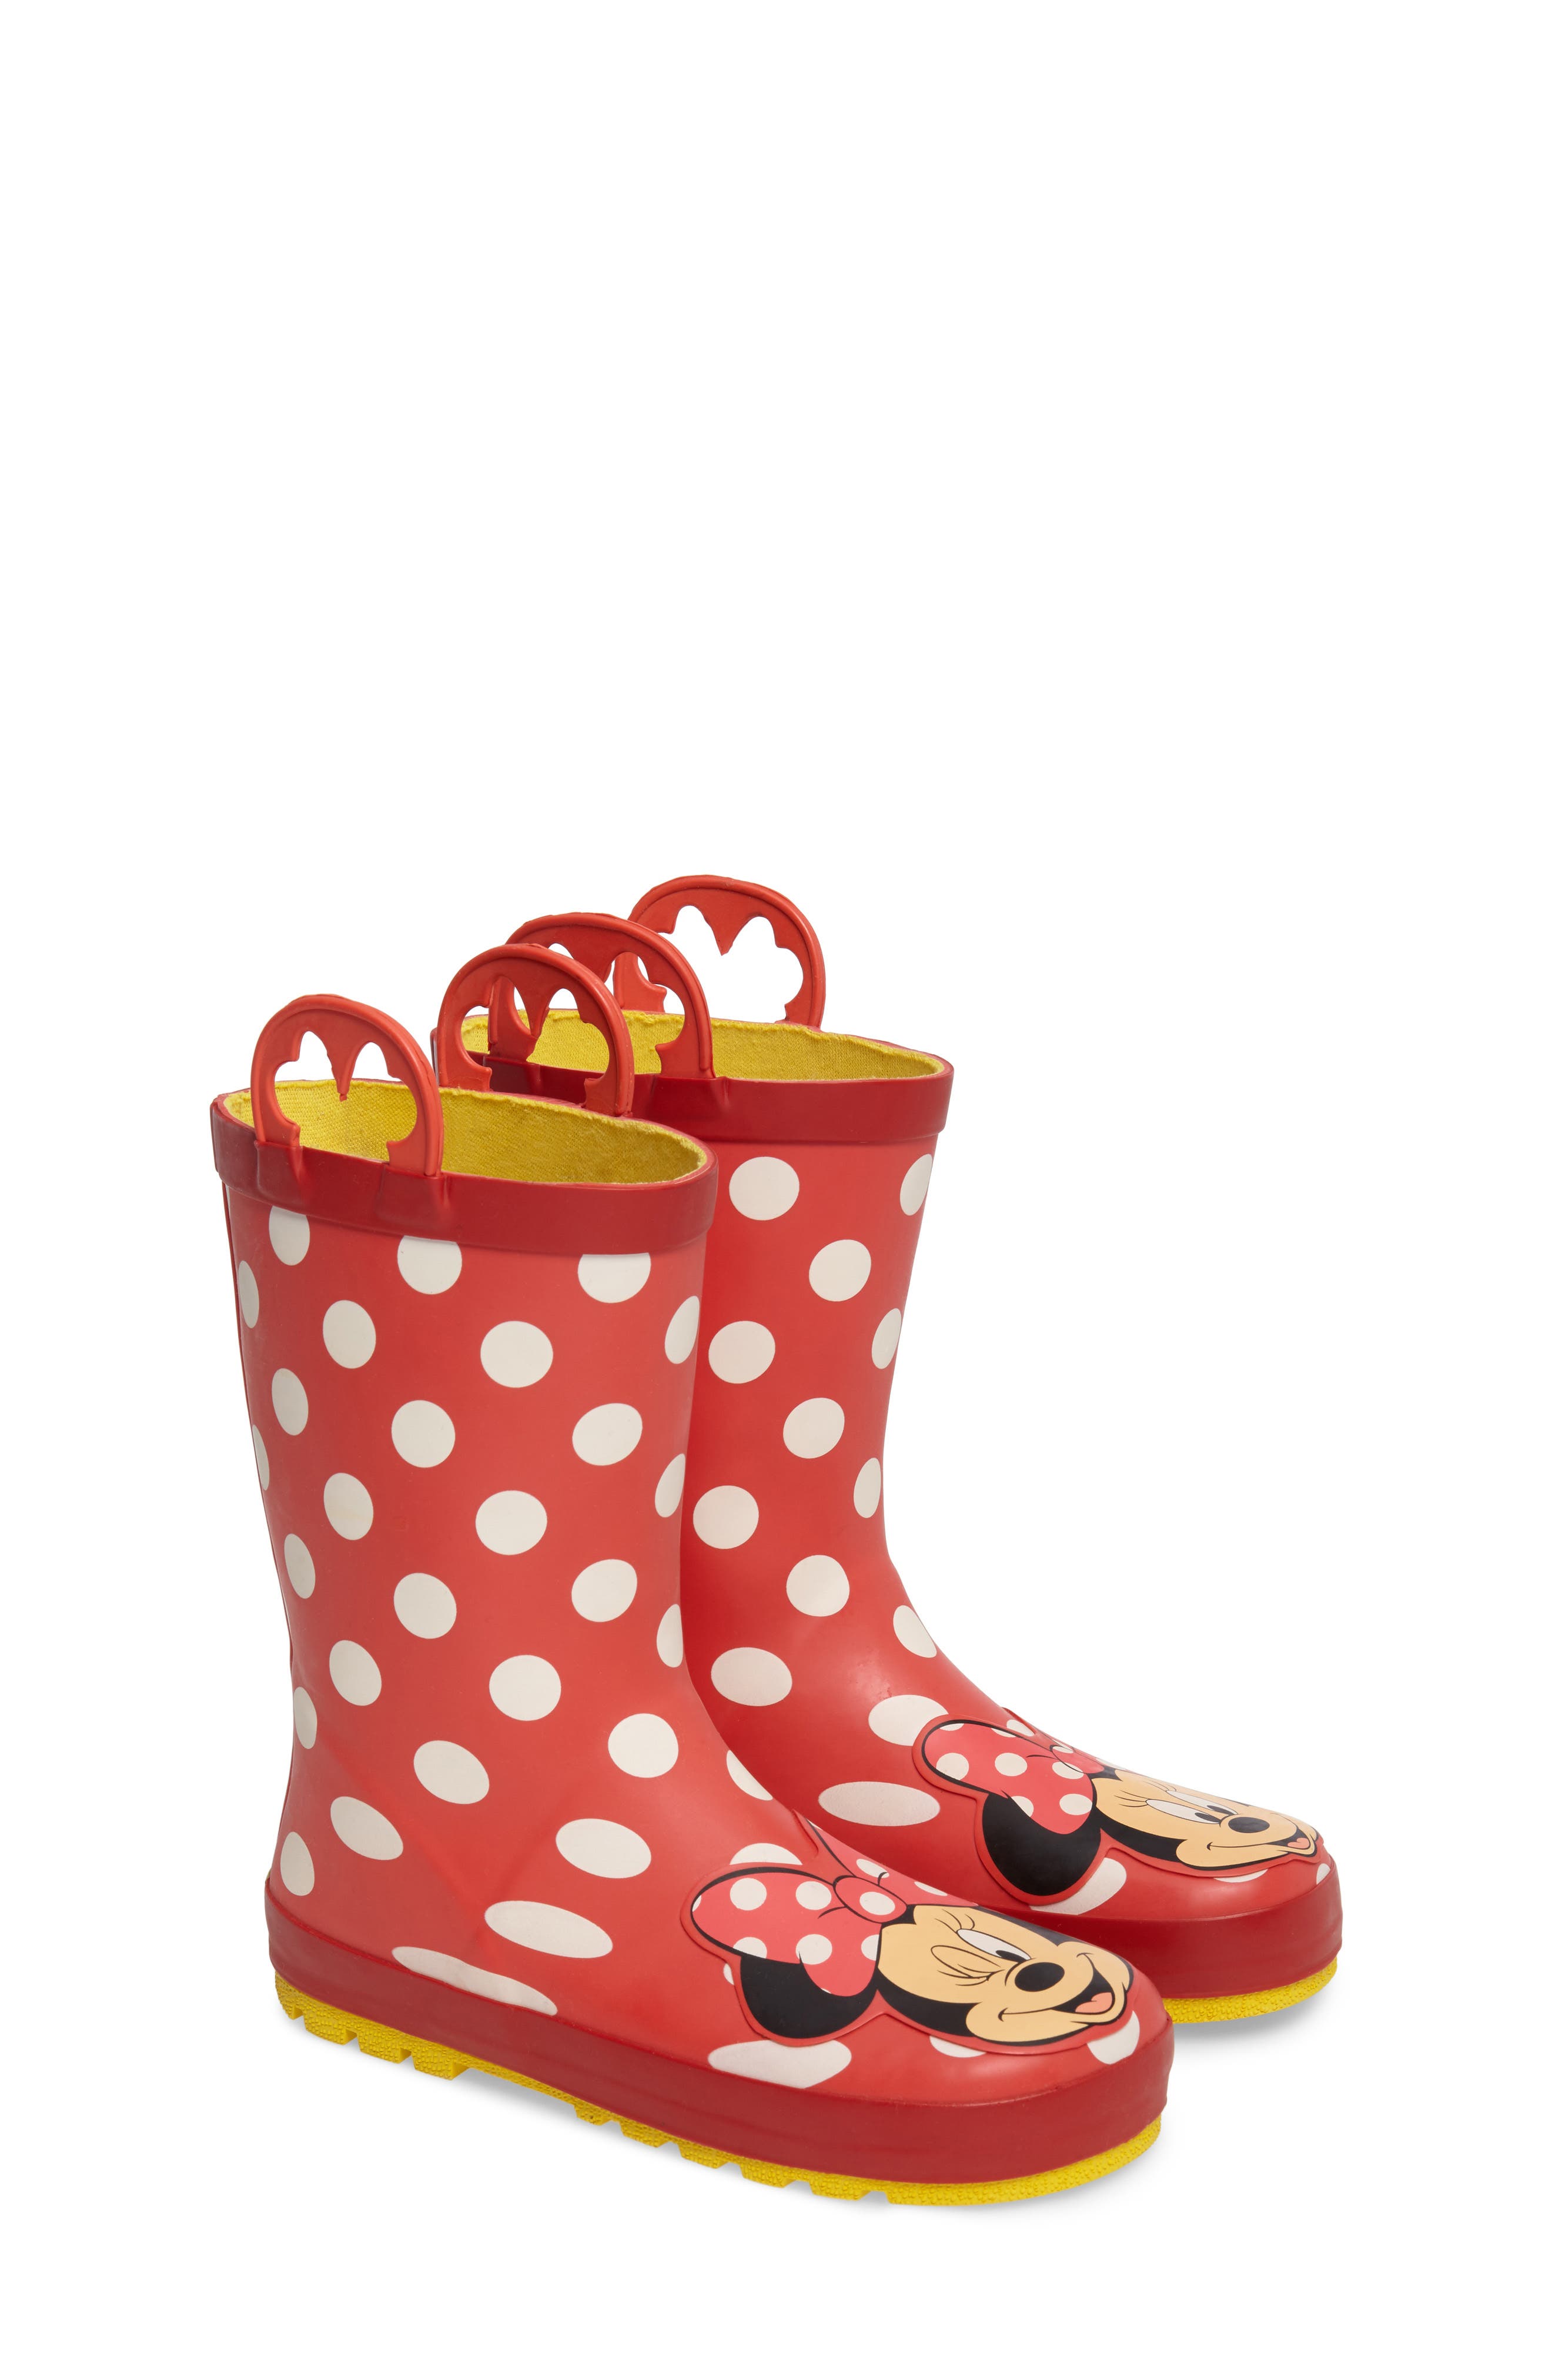 red rain boots with bow